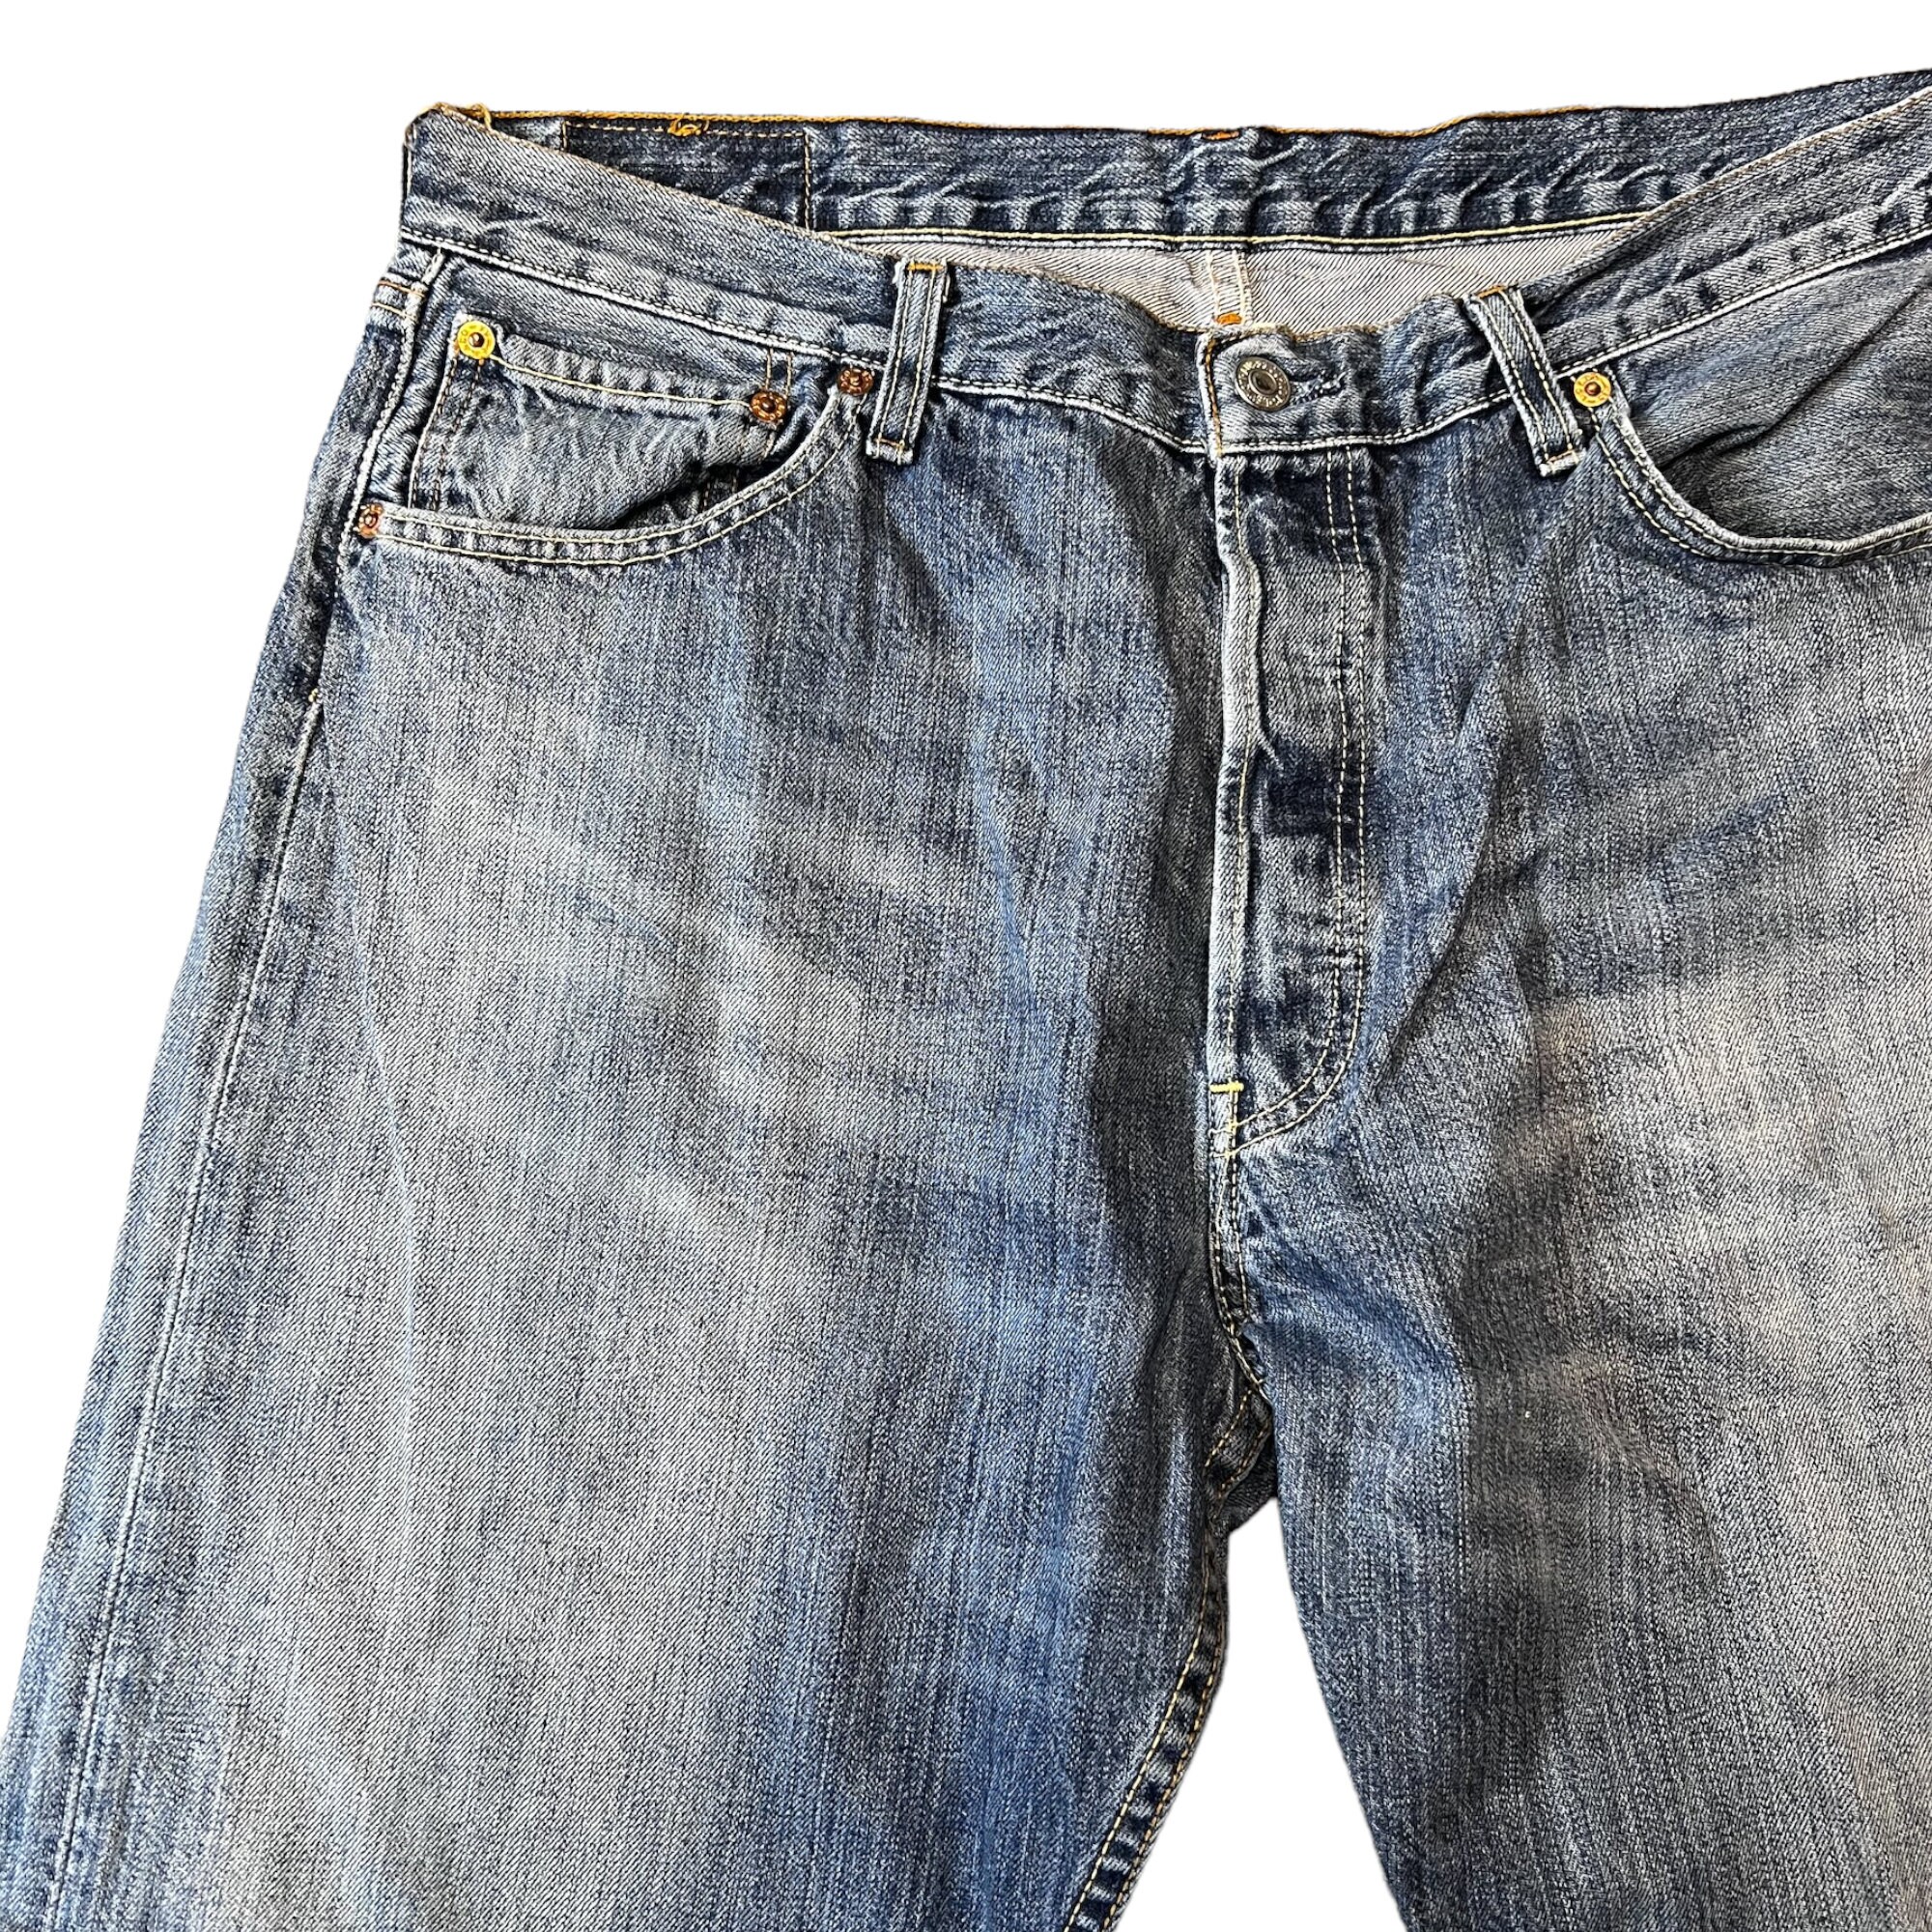 Buy Vintage Levi's 501 Jeans Size W36 L30 Online in India 